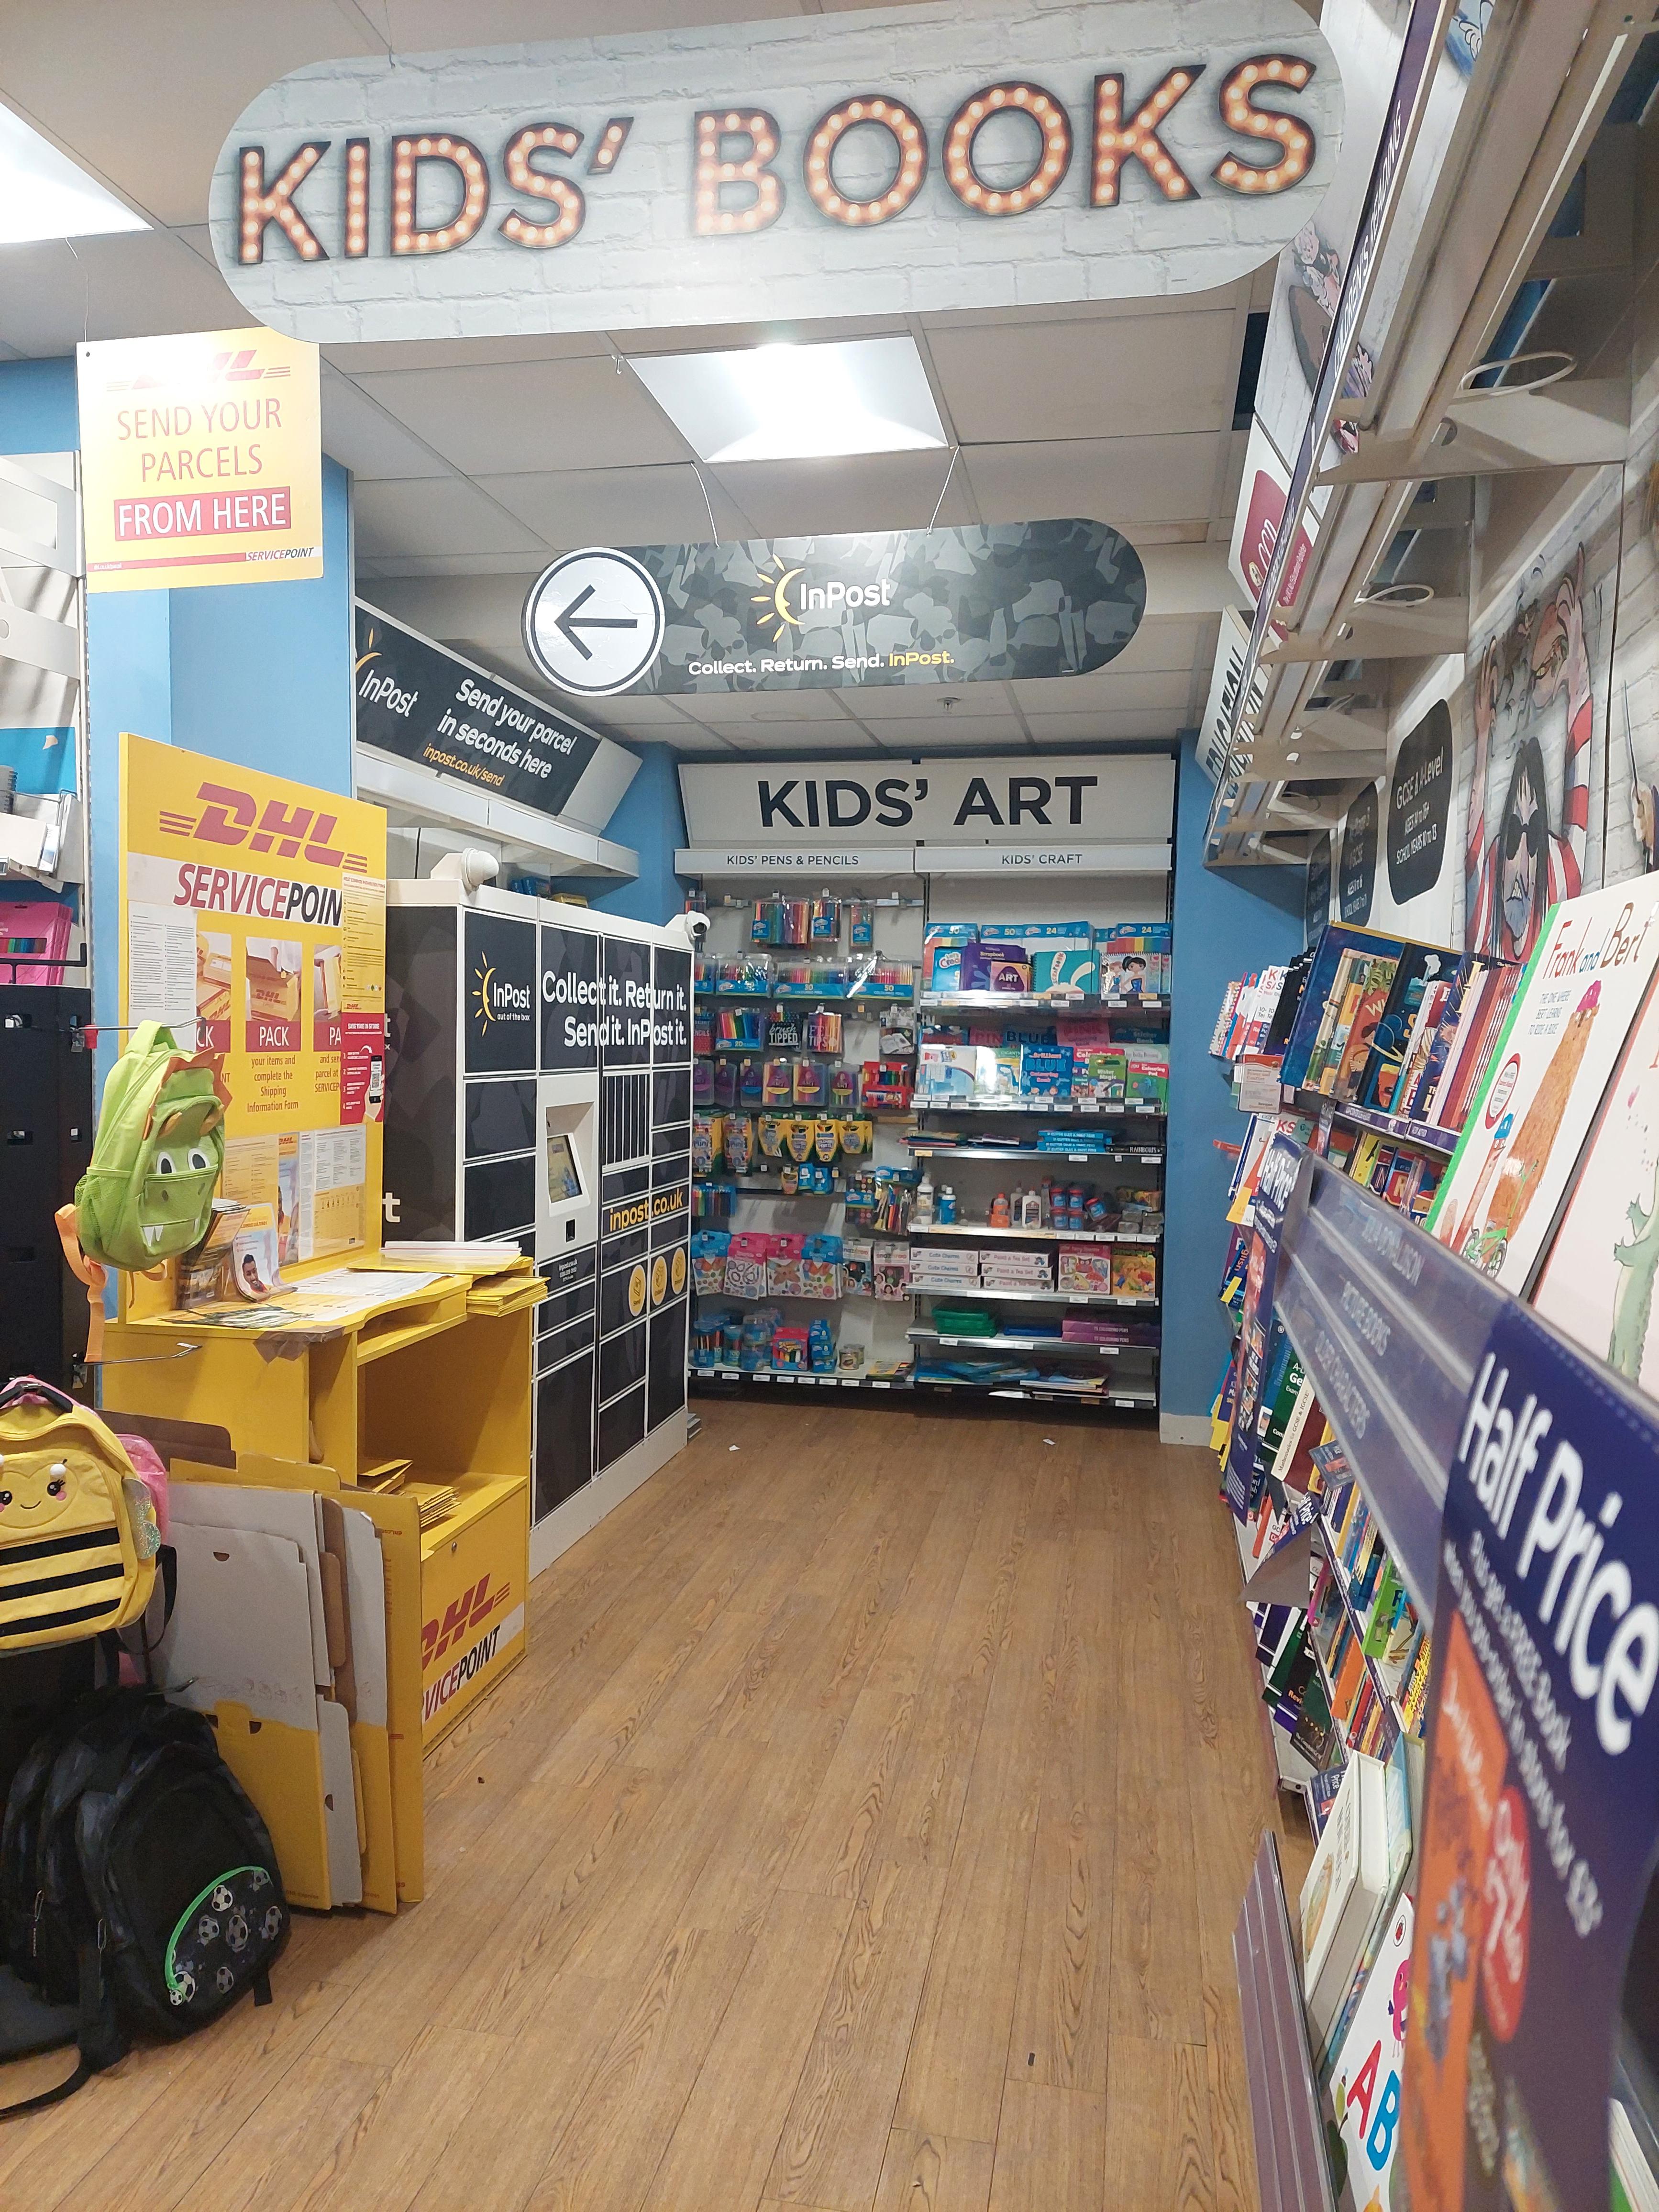 Images DHL Express Service Point (WHSmith Barnet)